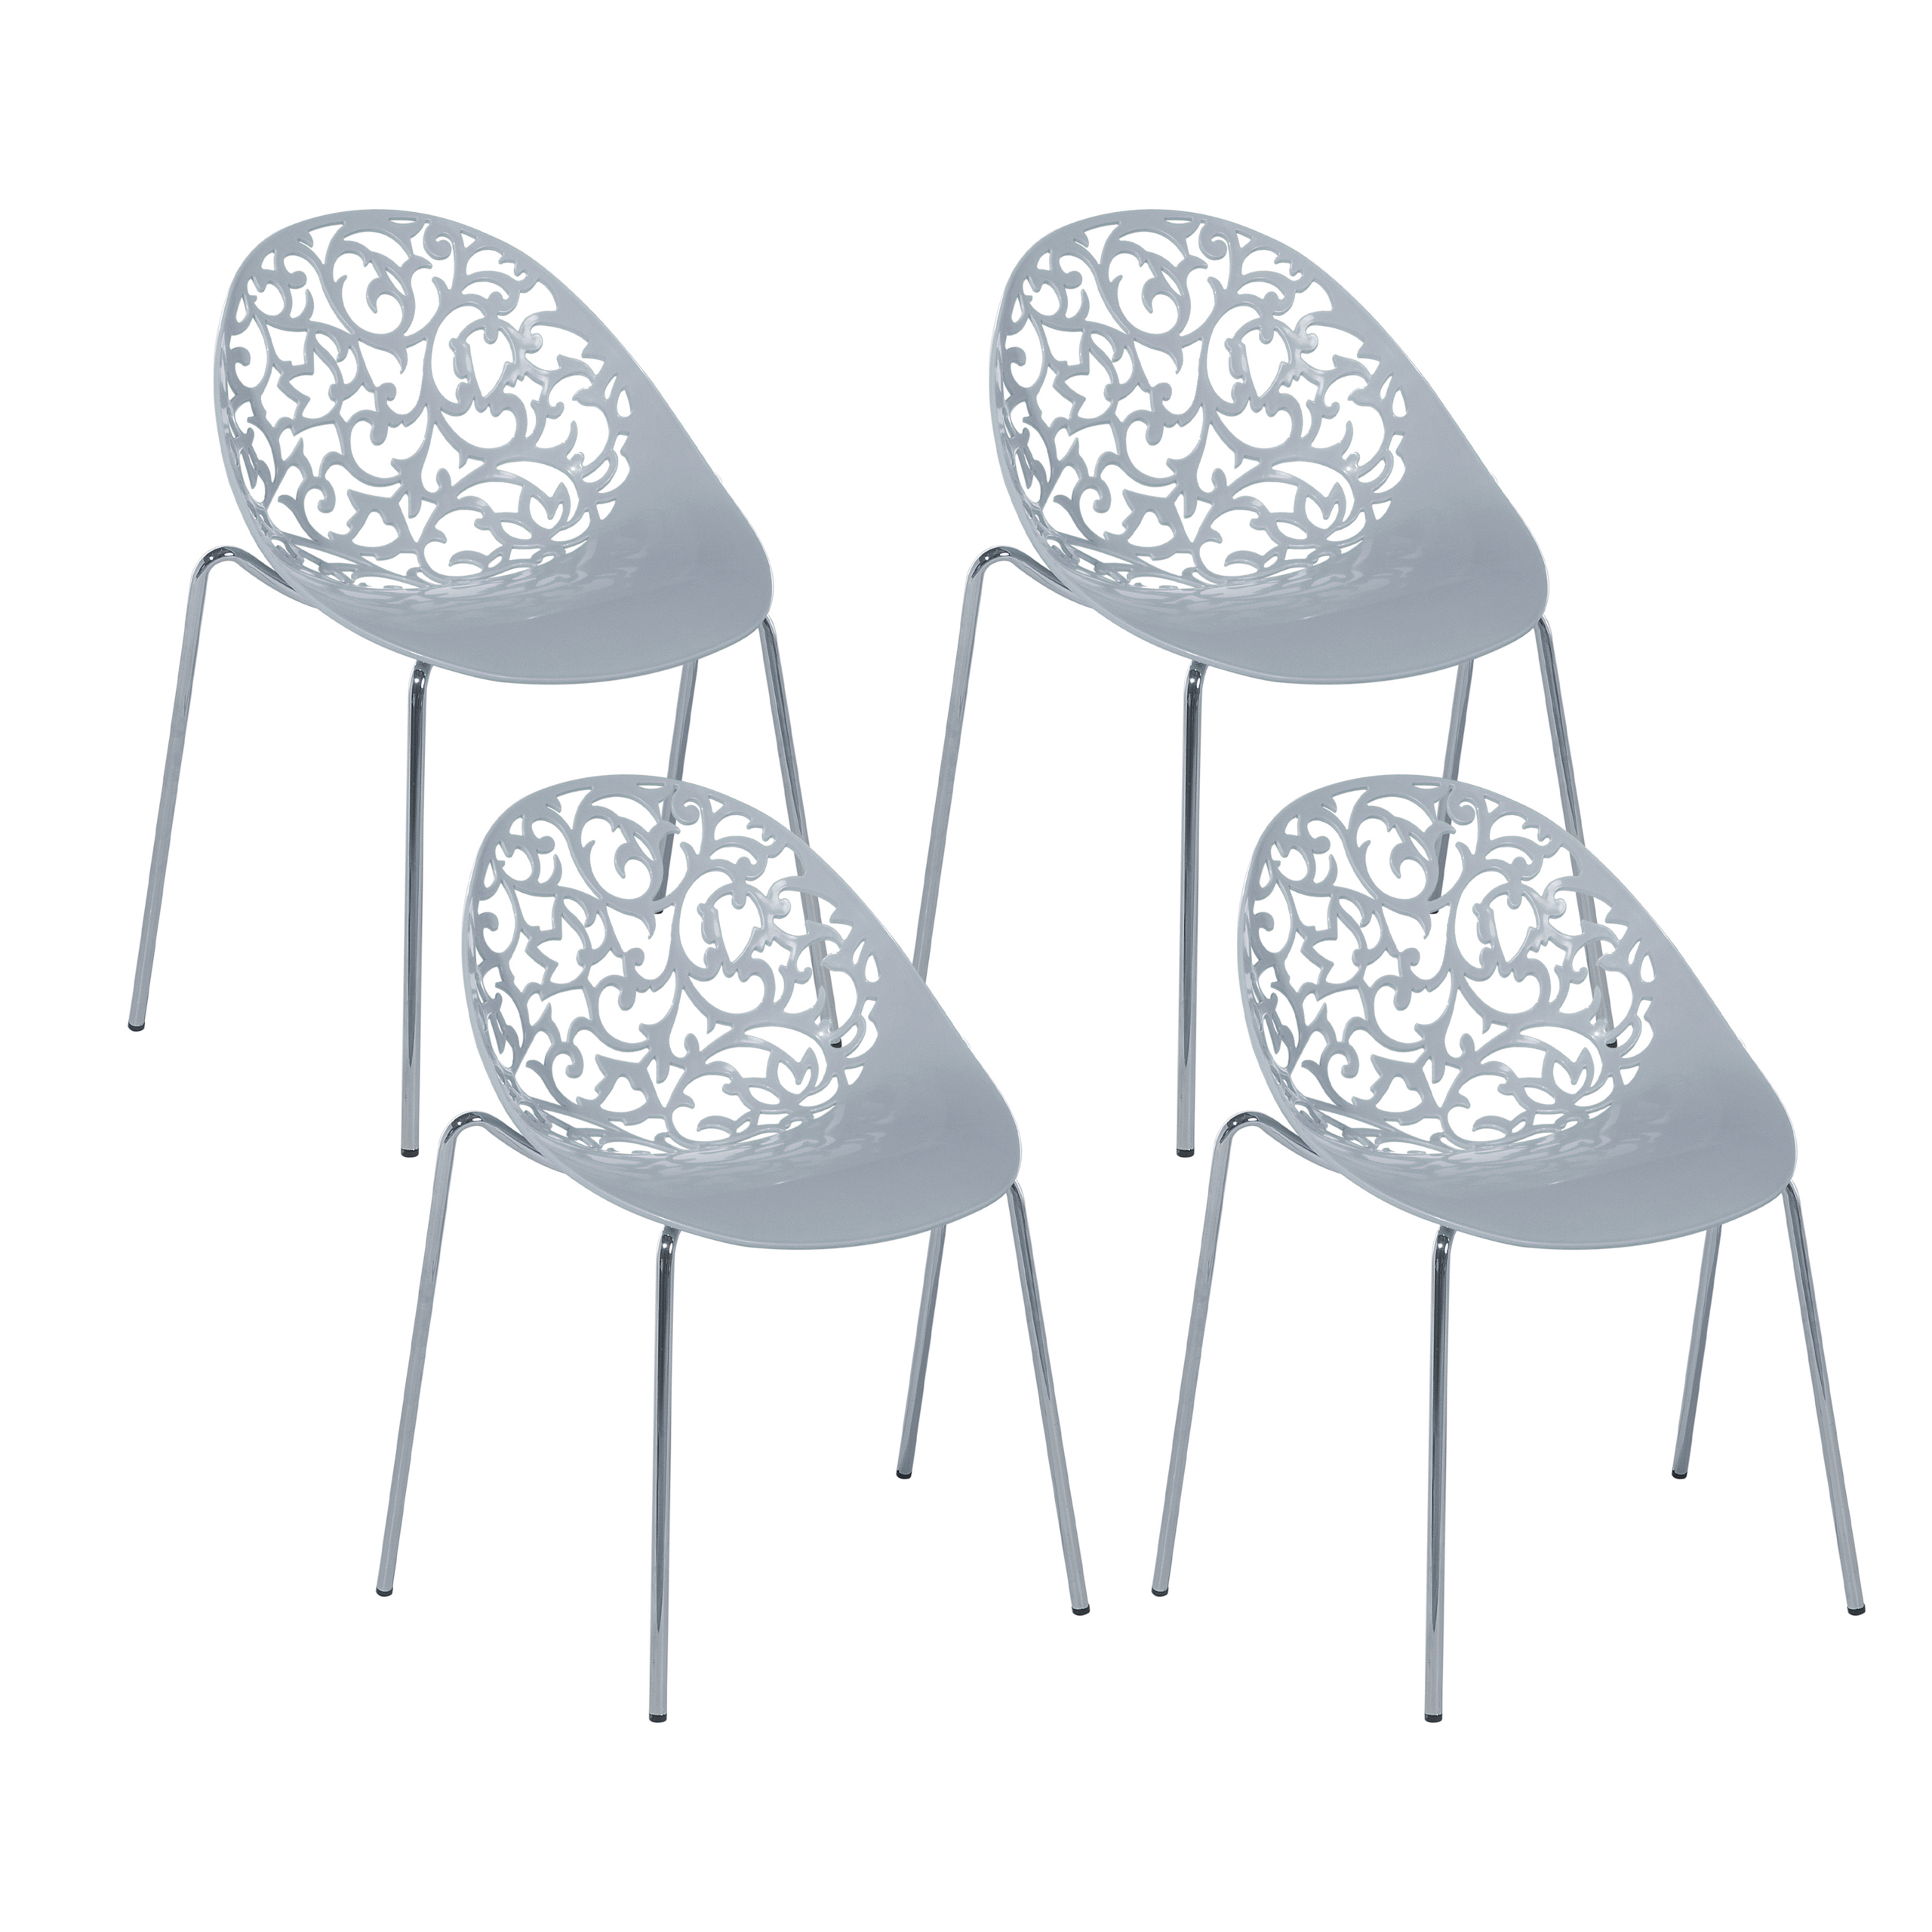 Beliani Set of 4 Dining Chairs Grey Plastic Cut Out Modern